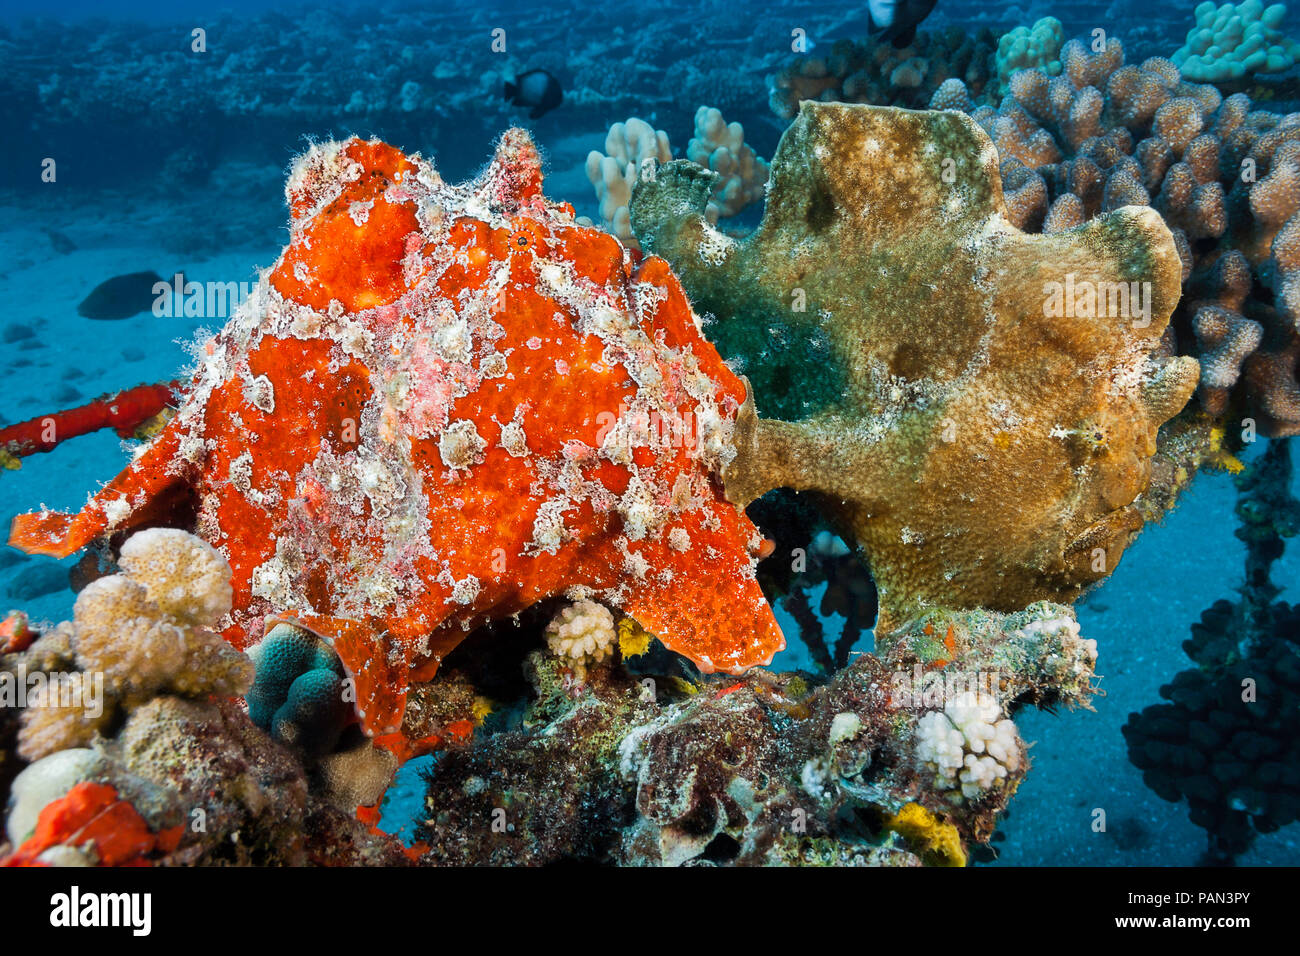 A pair of Commerson's frogfish, Antennarius commersoni, vie for a spot on the reef off Maui, Hawaii. Stock Photo